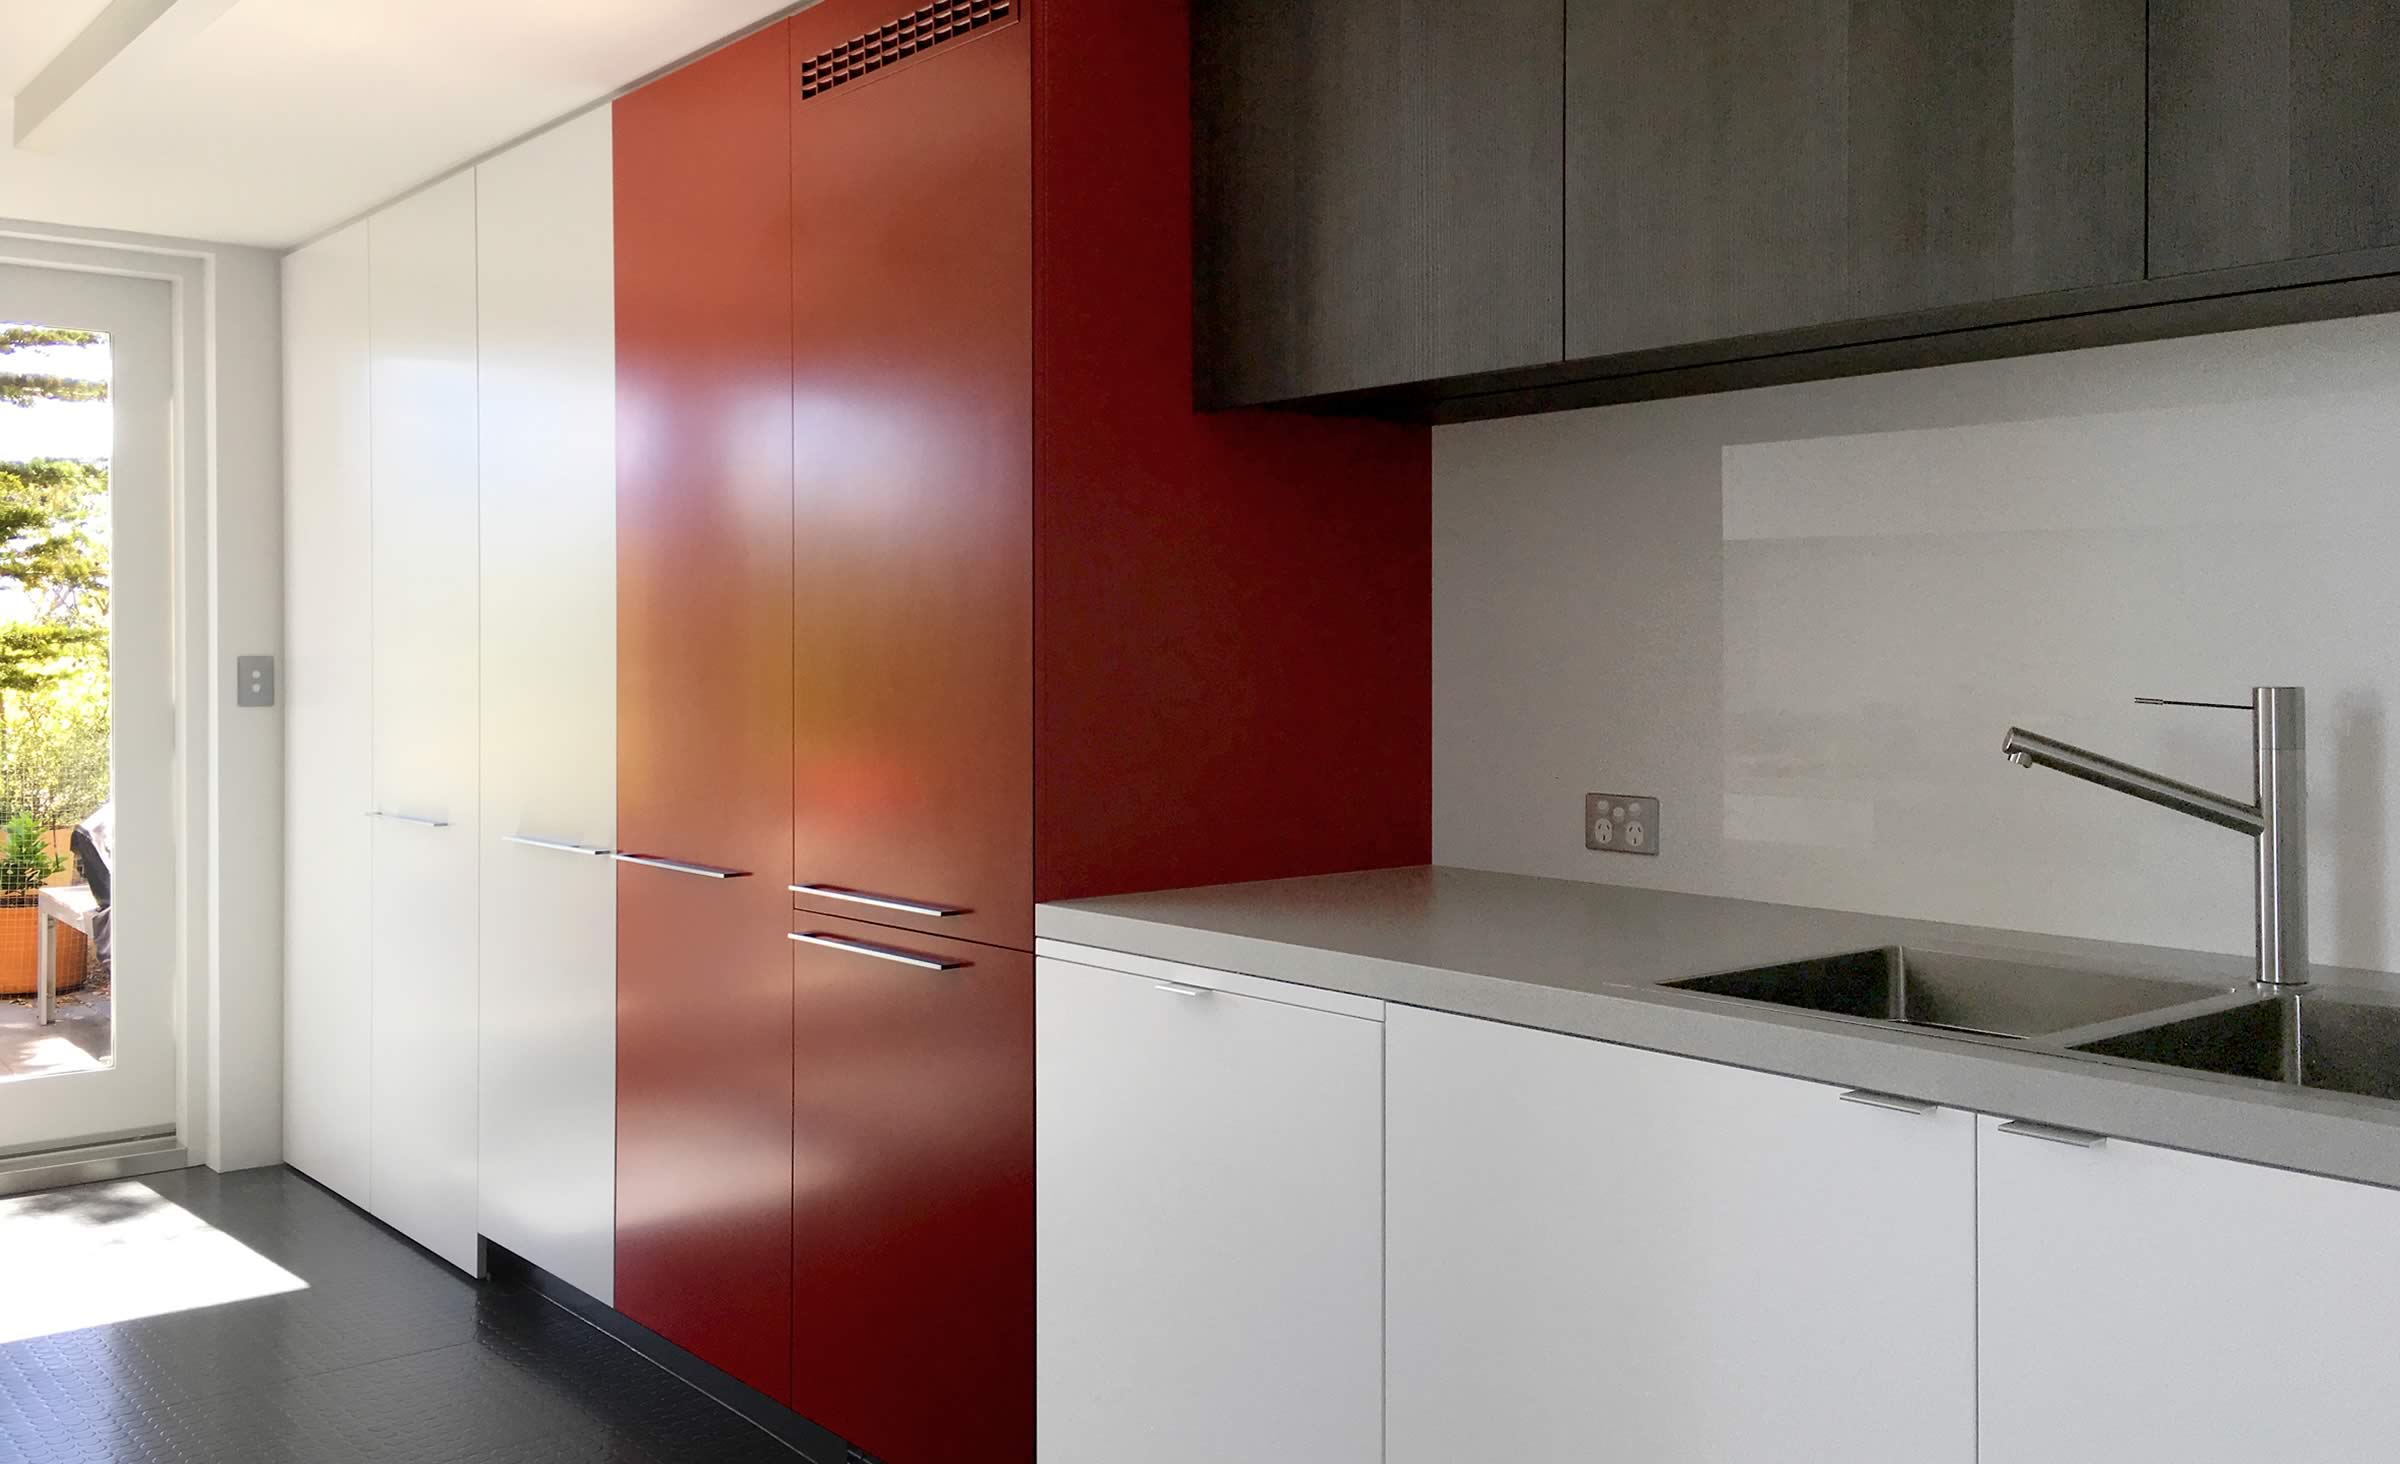 Customised kitchen joinery incorporating European laundry, two-pack paint finishes and laminates.